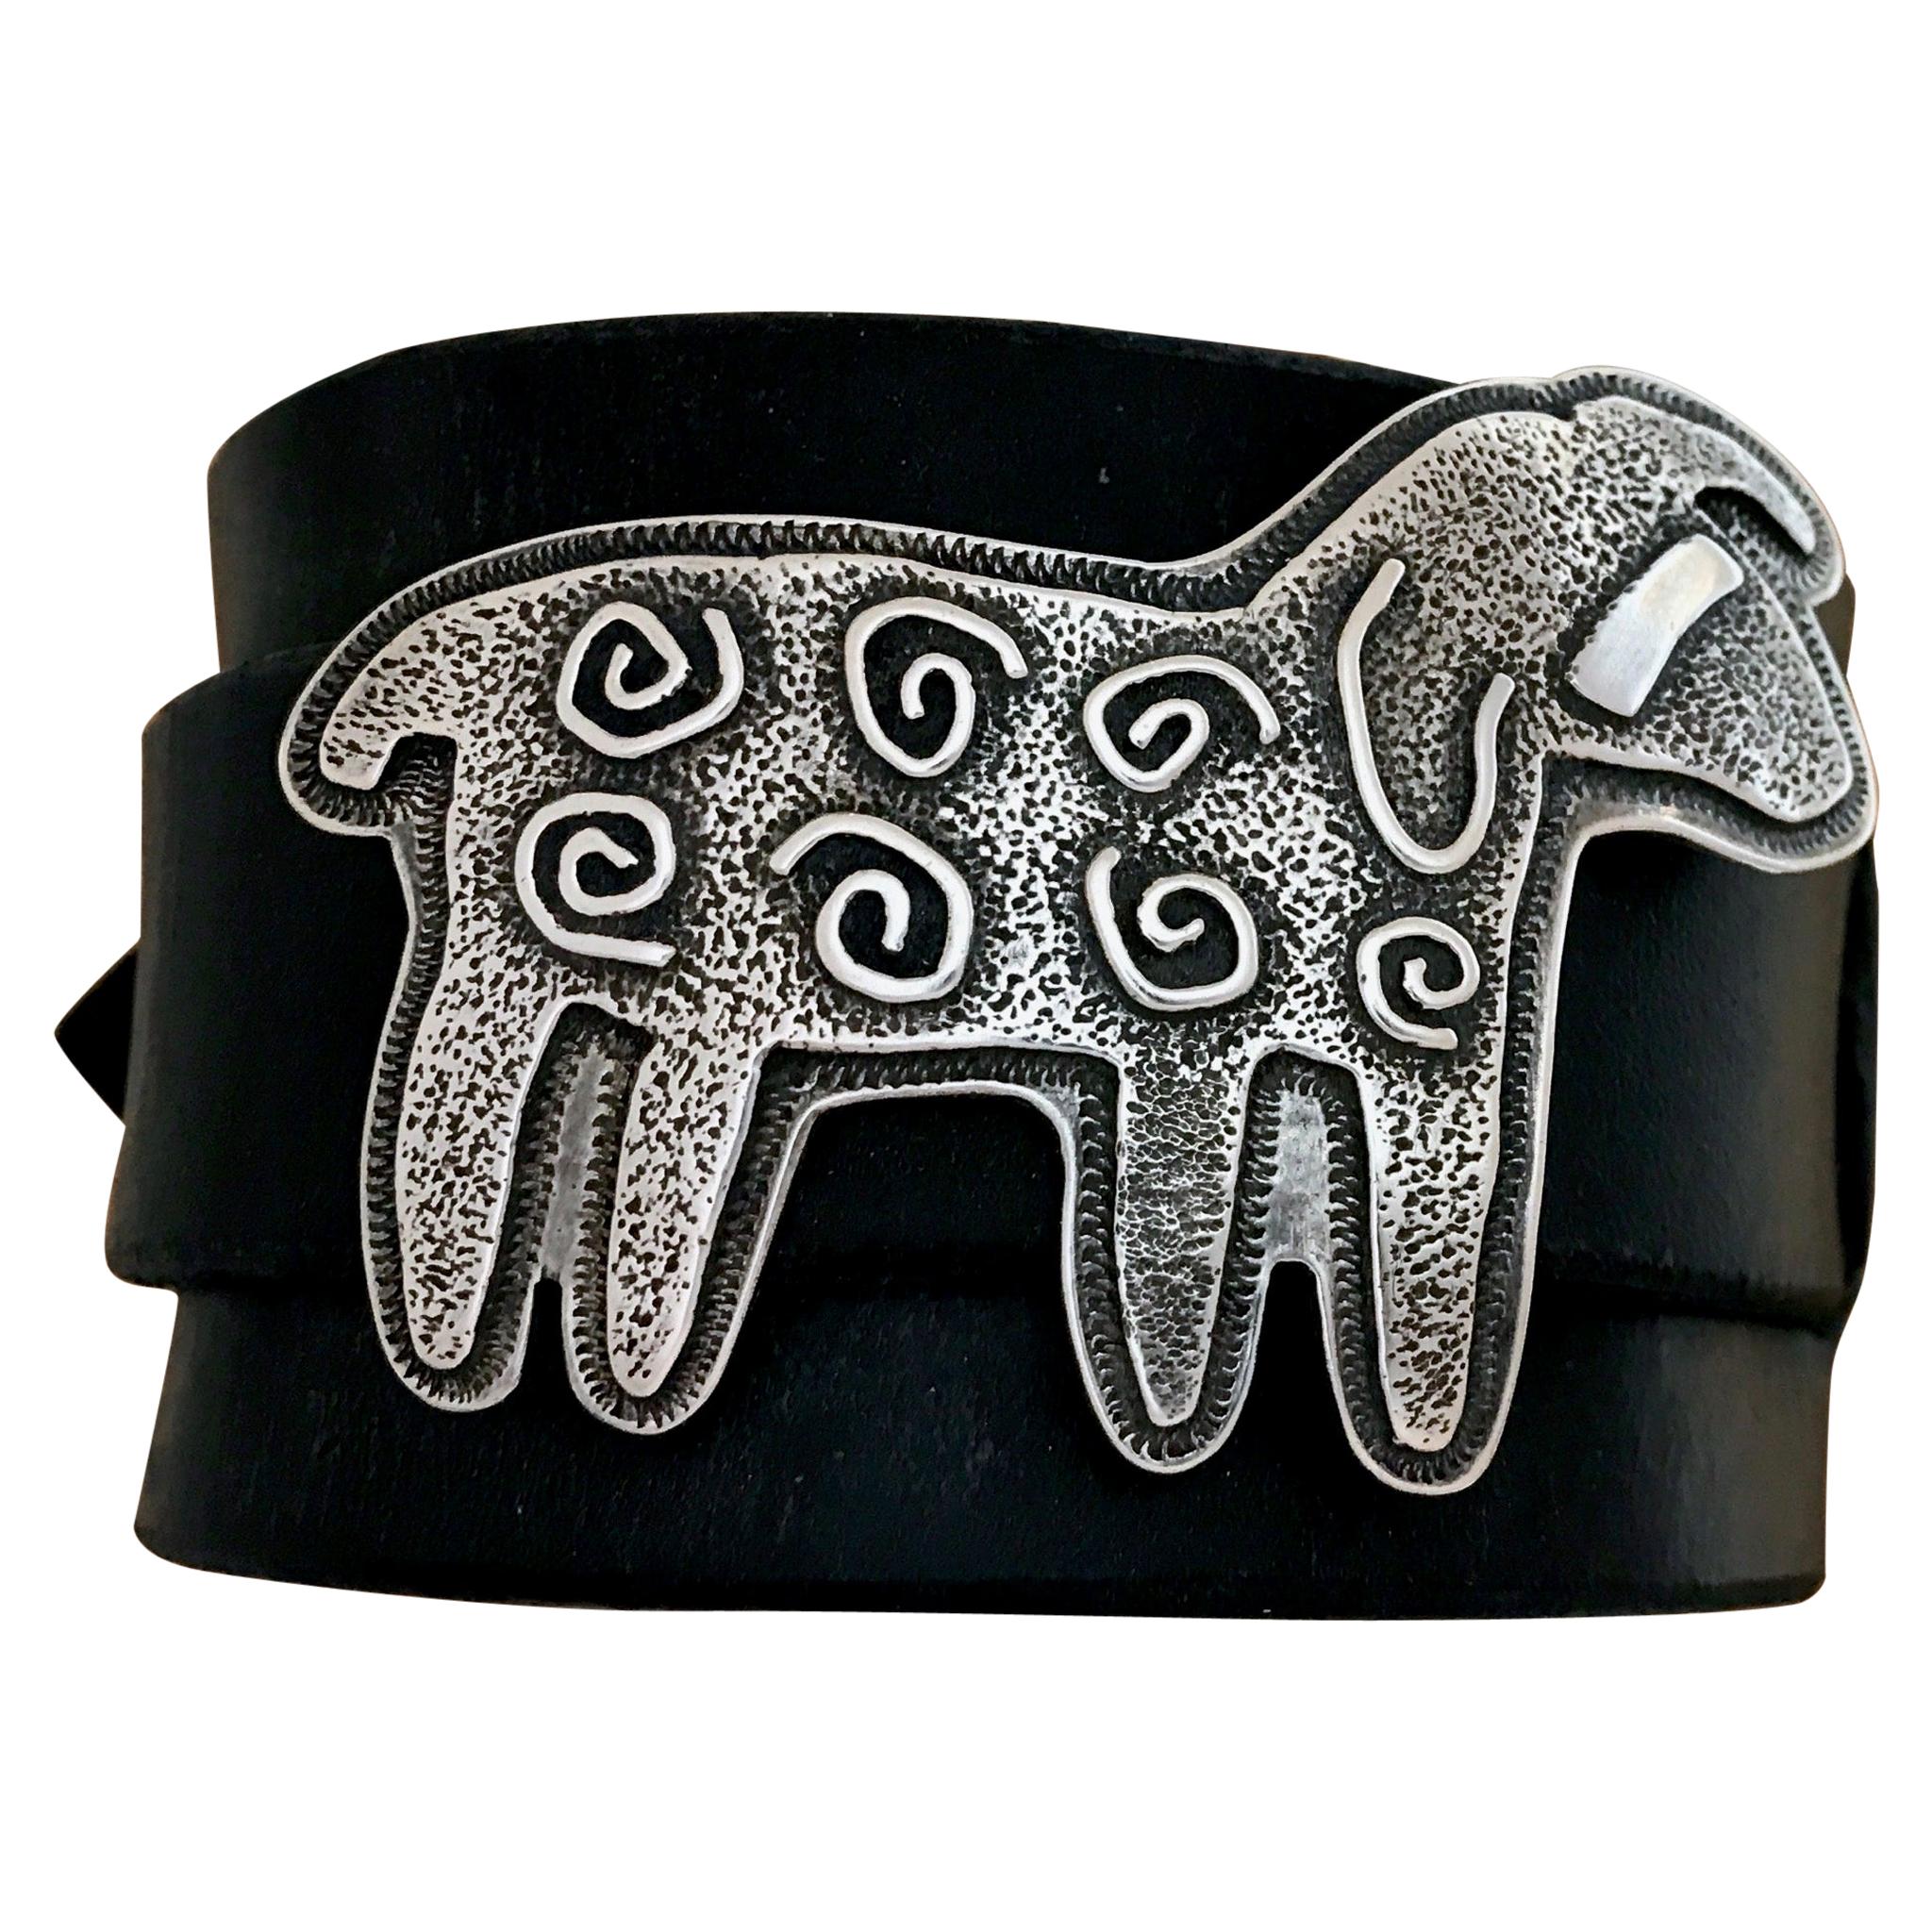 Curly Sheep leather cuff bracelet, cast sterling silver, leather adjustable cuff